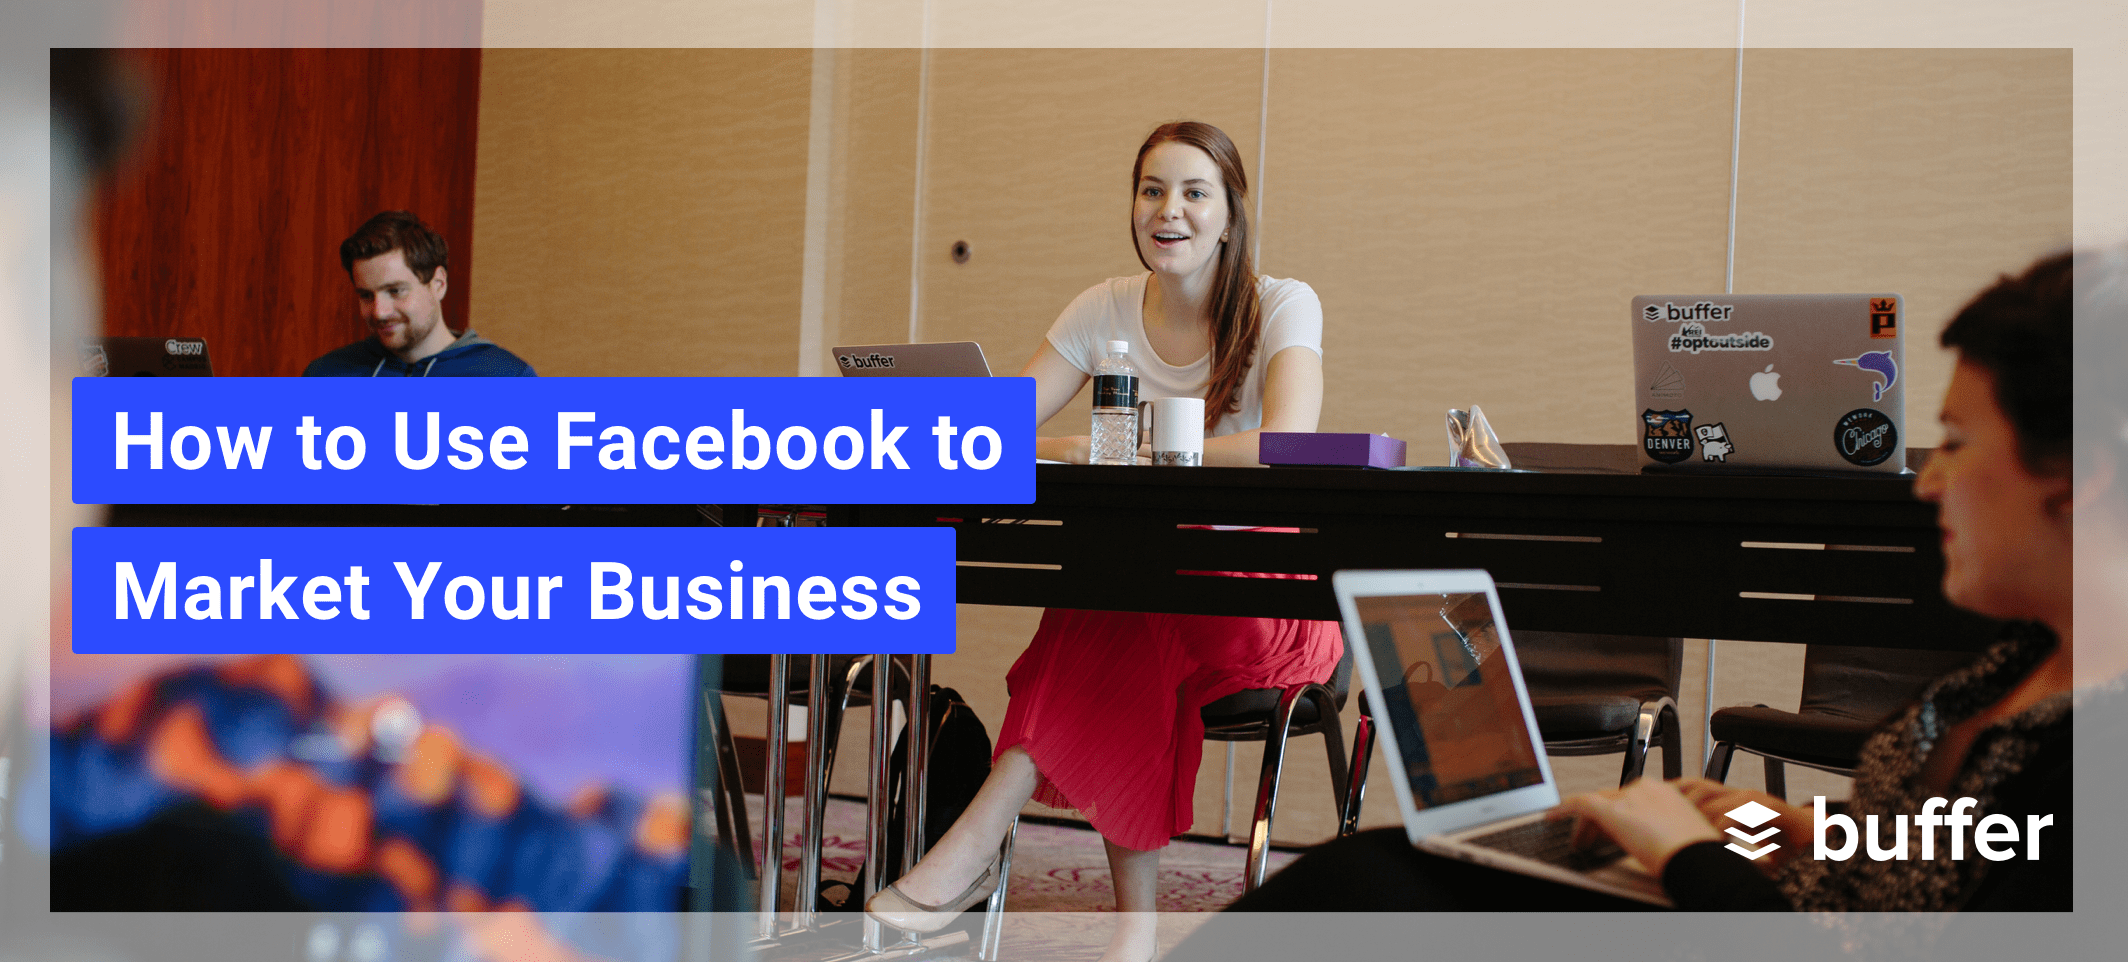 How to Use Facebook to Market Your Business